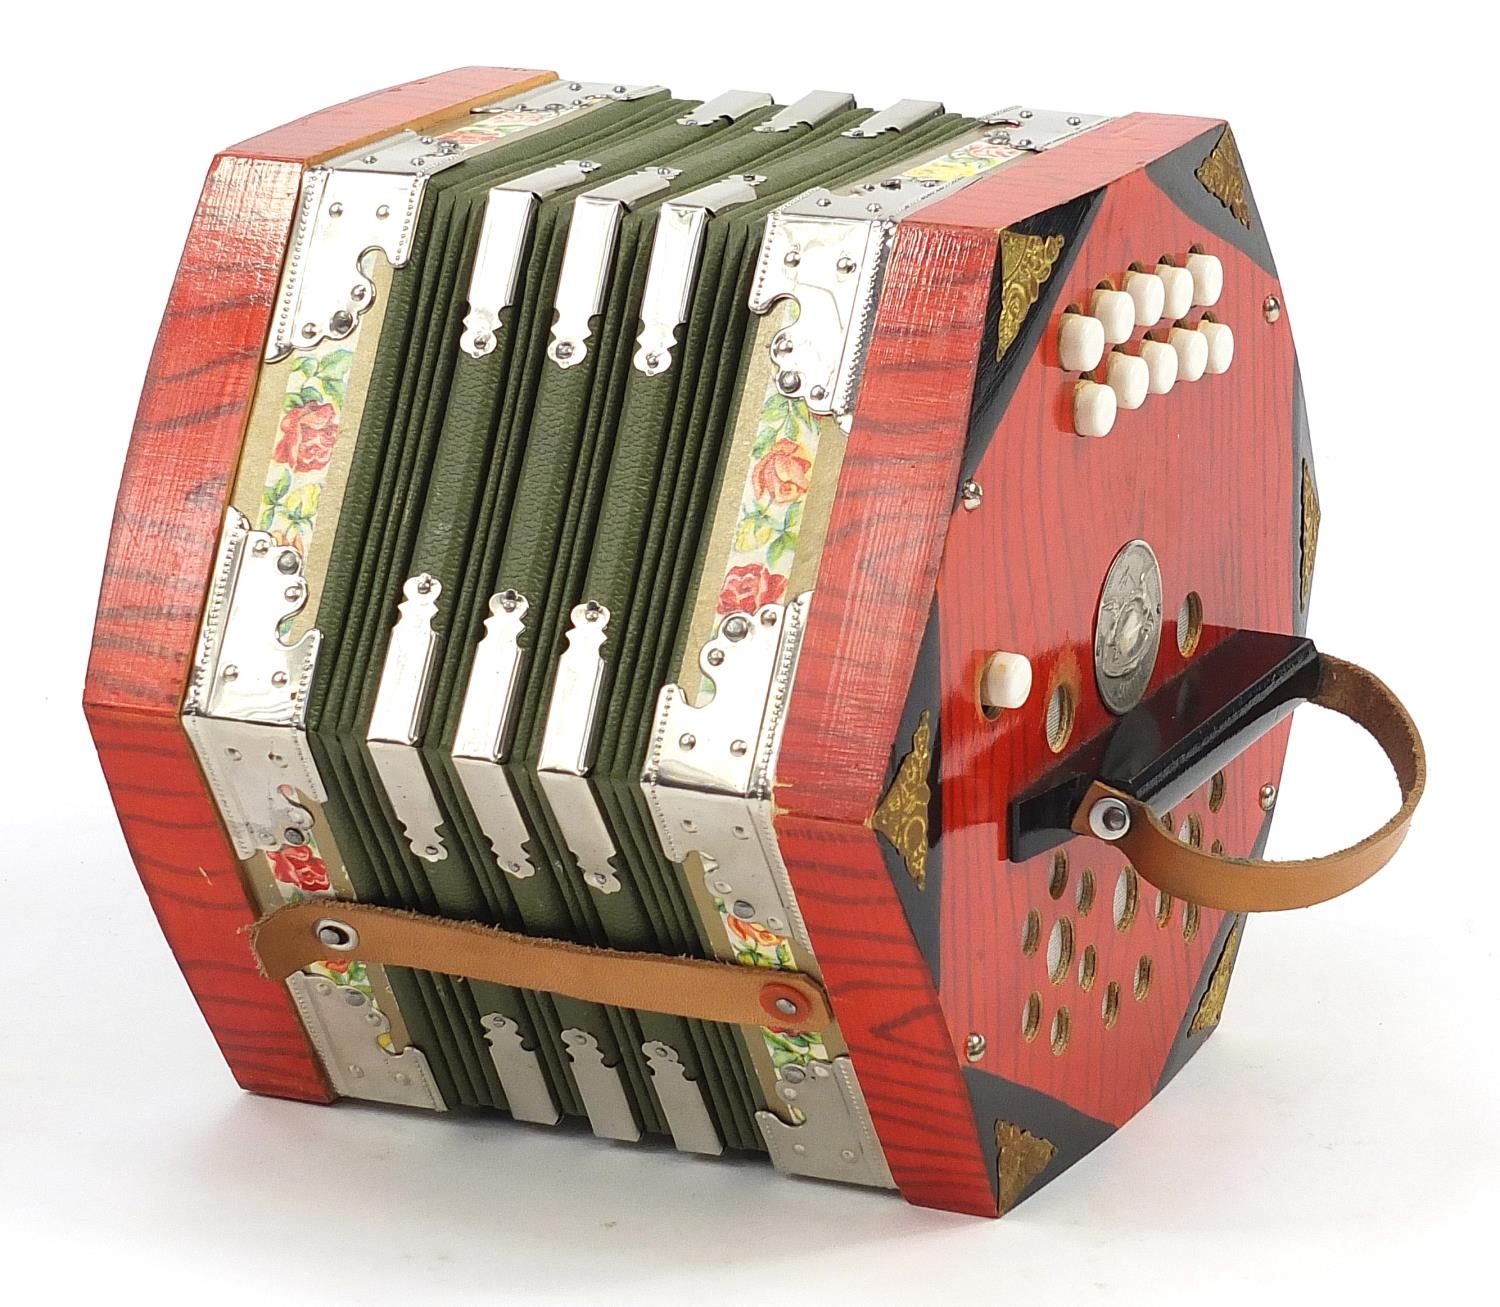 Scholer ten button concertina with pine case, 19cm wide - Image 2 of 5